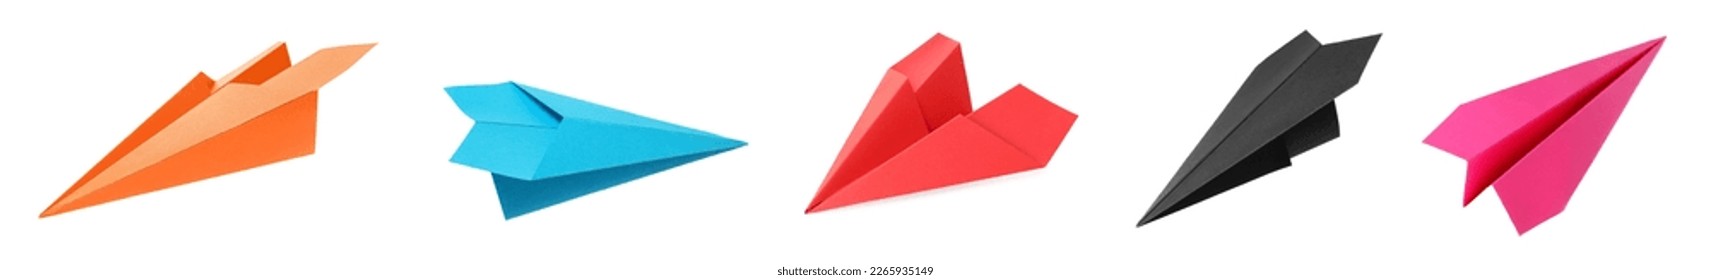 Collage with many paper planes on white background. Origami art - Shutterstock ID 2265935149